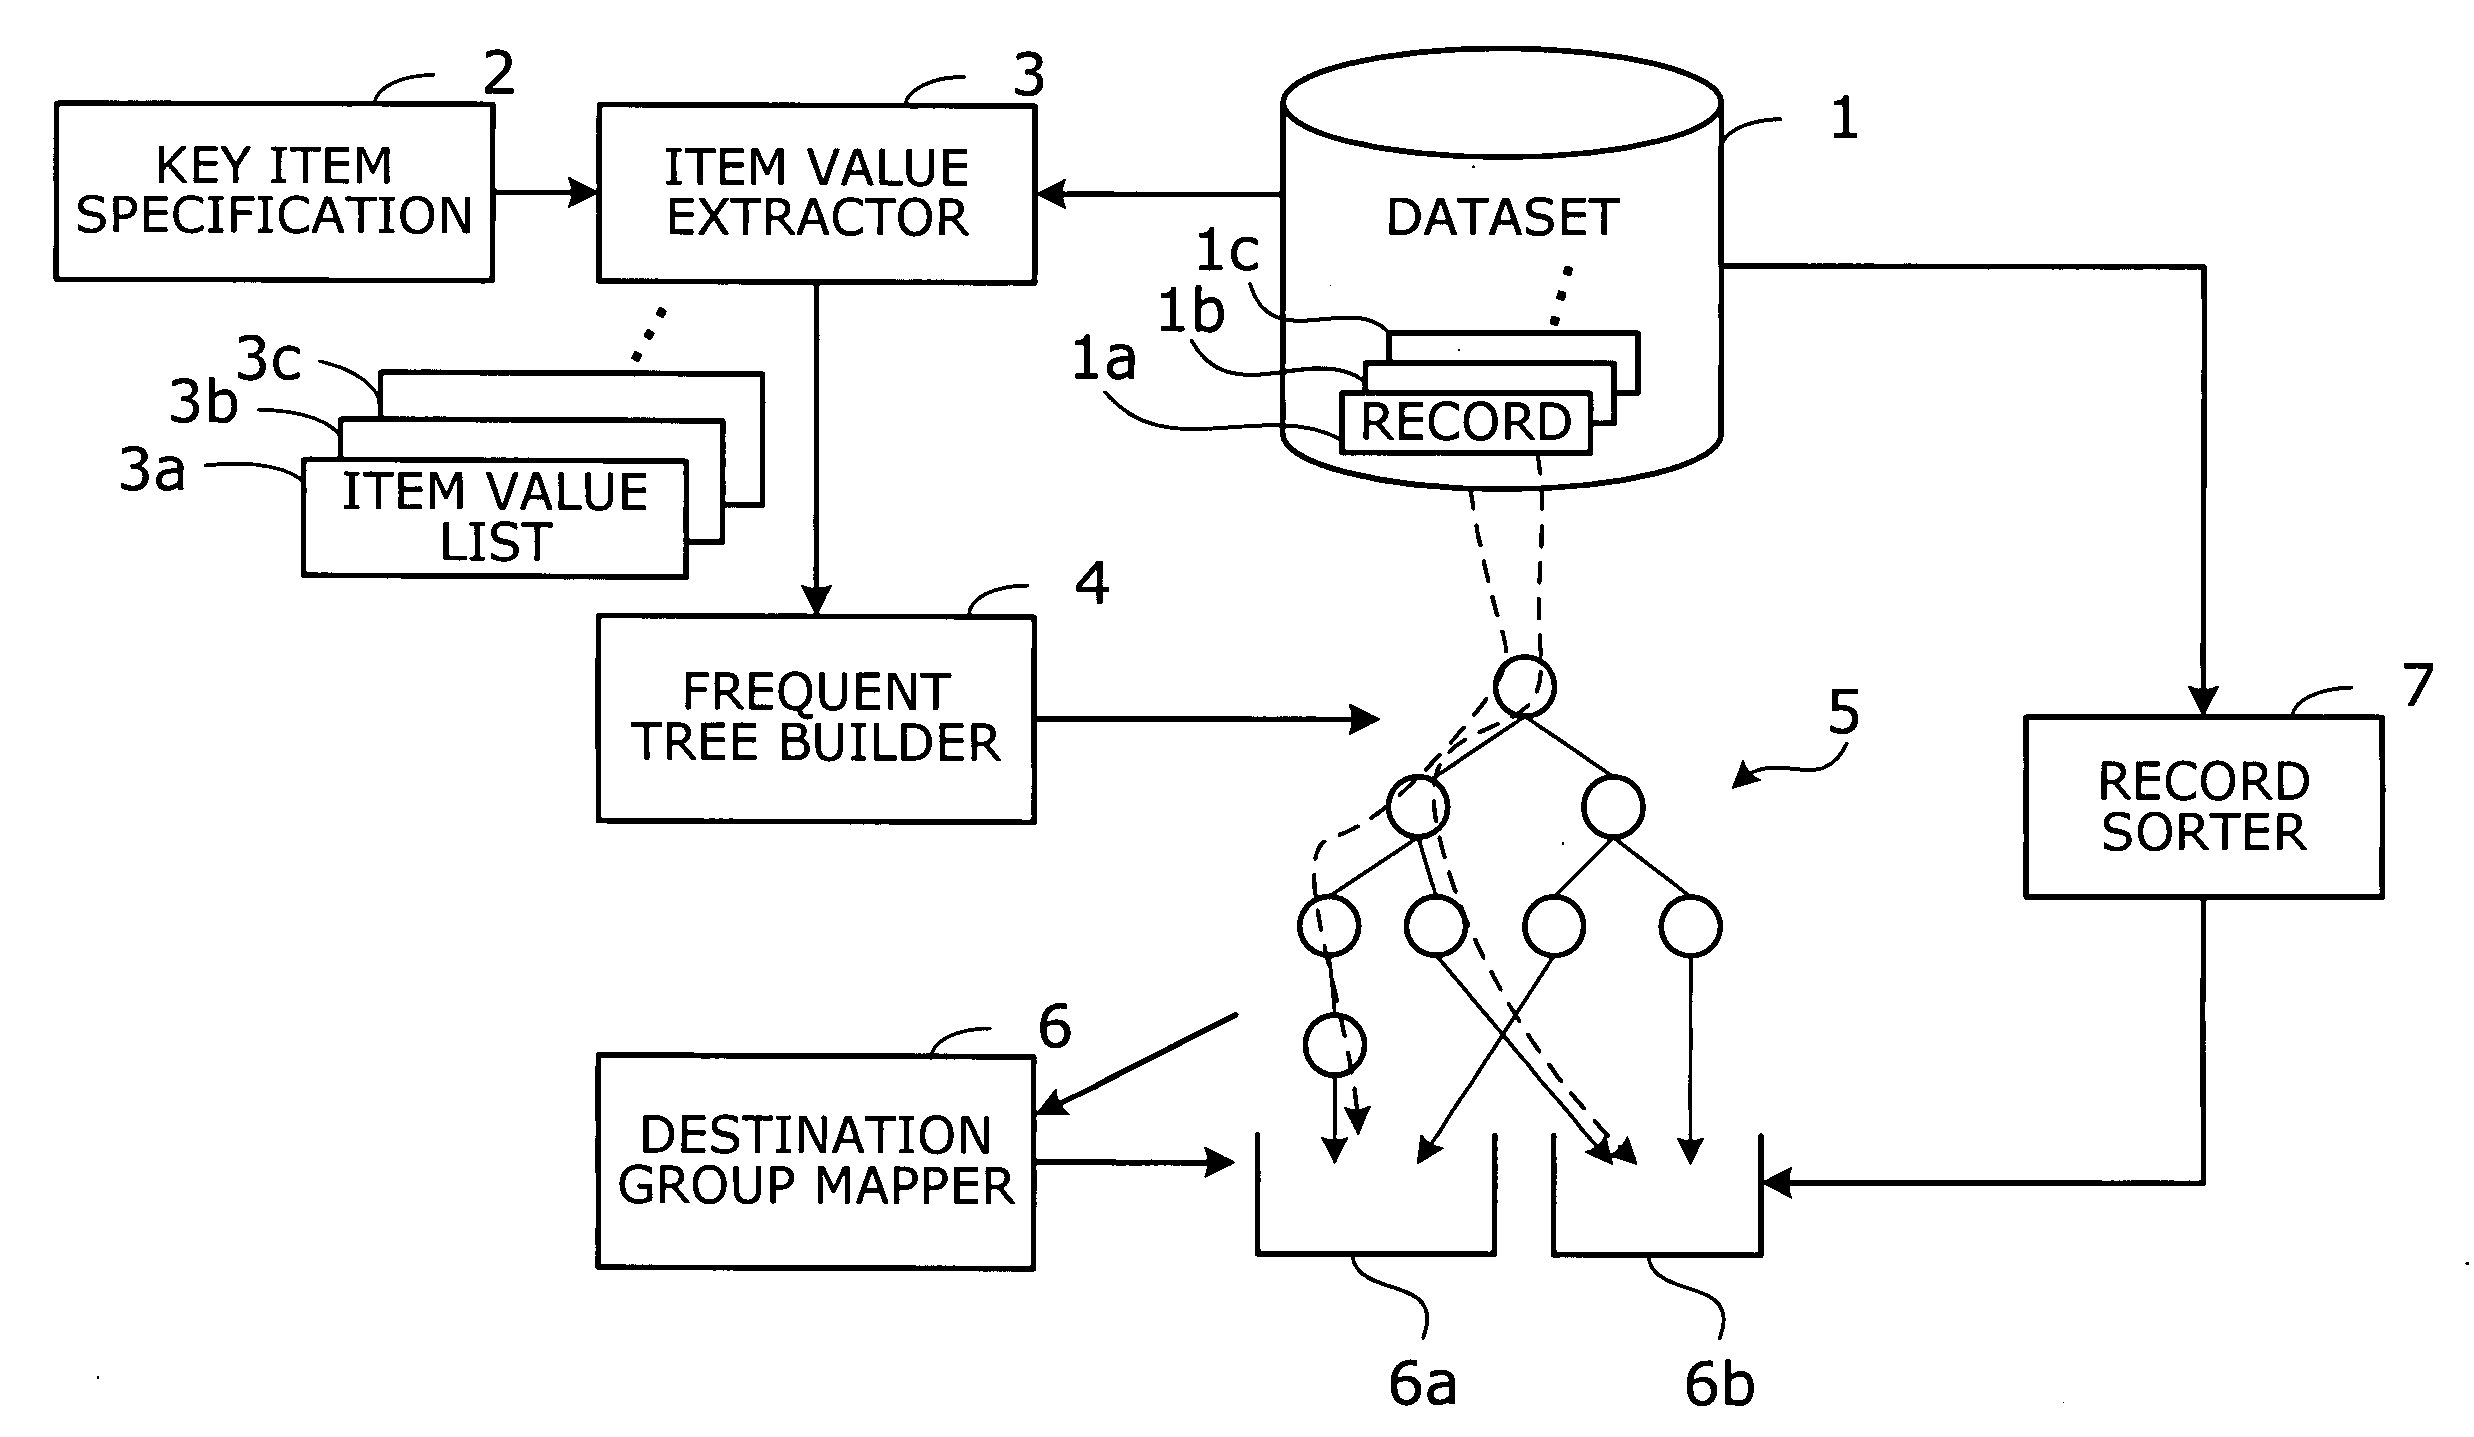 Computer program, device, and method for sorting dataset records into groups according to frequent tree